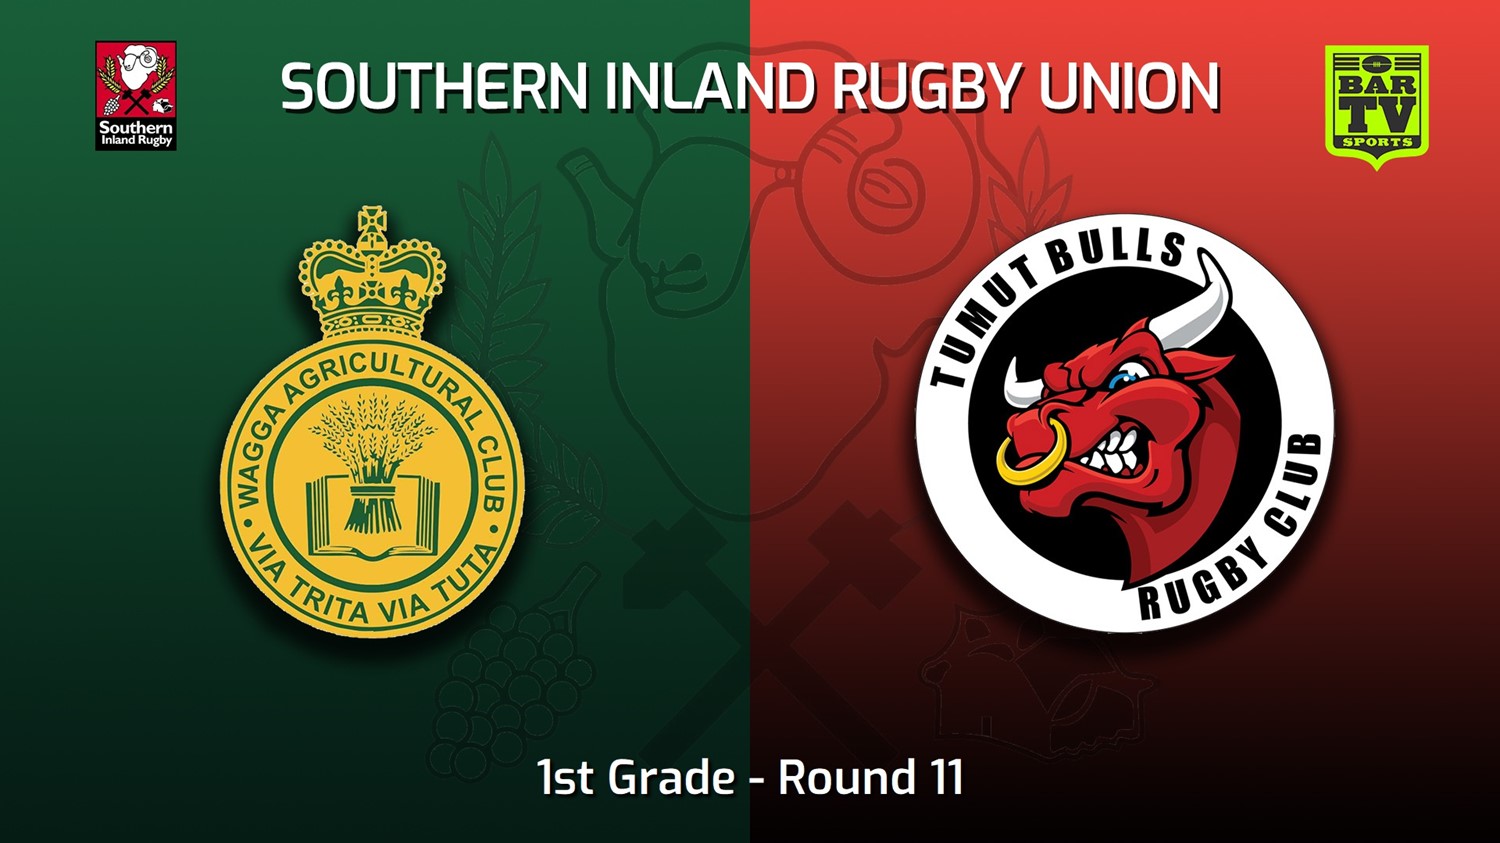 220625-Southern Inland Rugby Union Round 11 - 1st Grade - Wagga Agricultural College v Tumut Bulls Slate Image